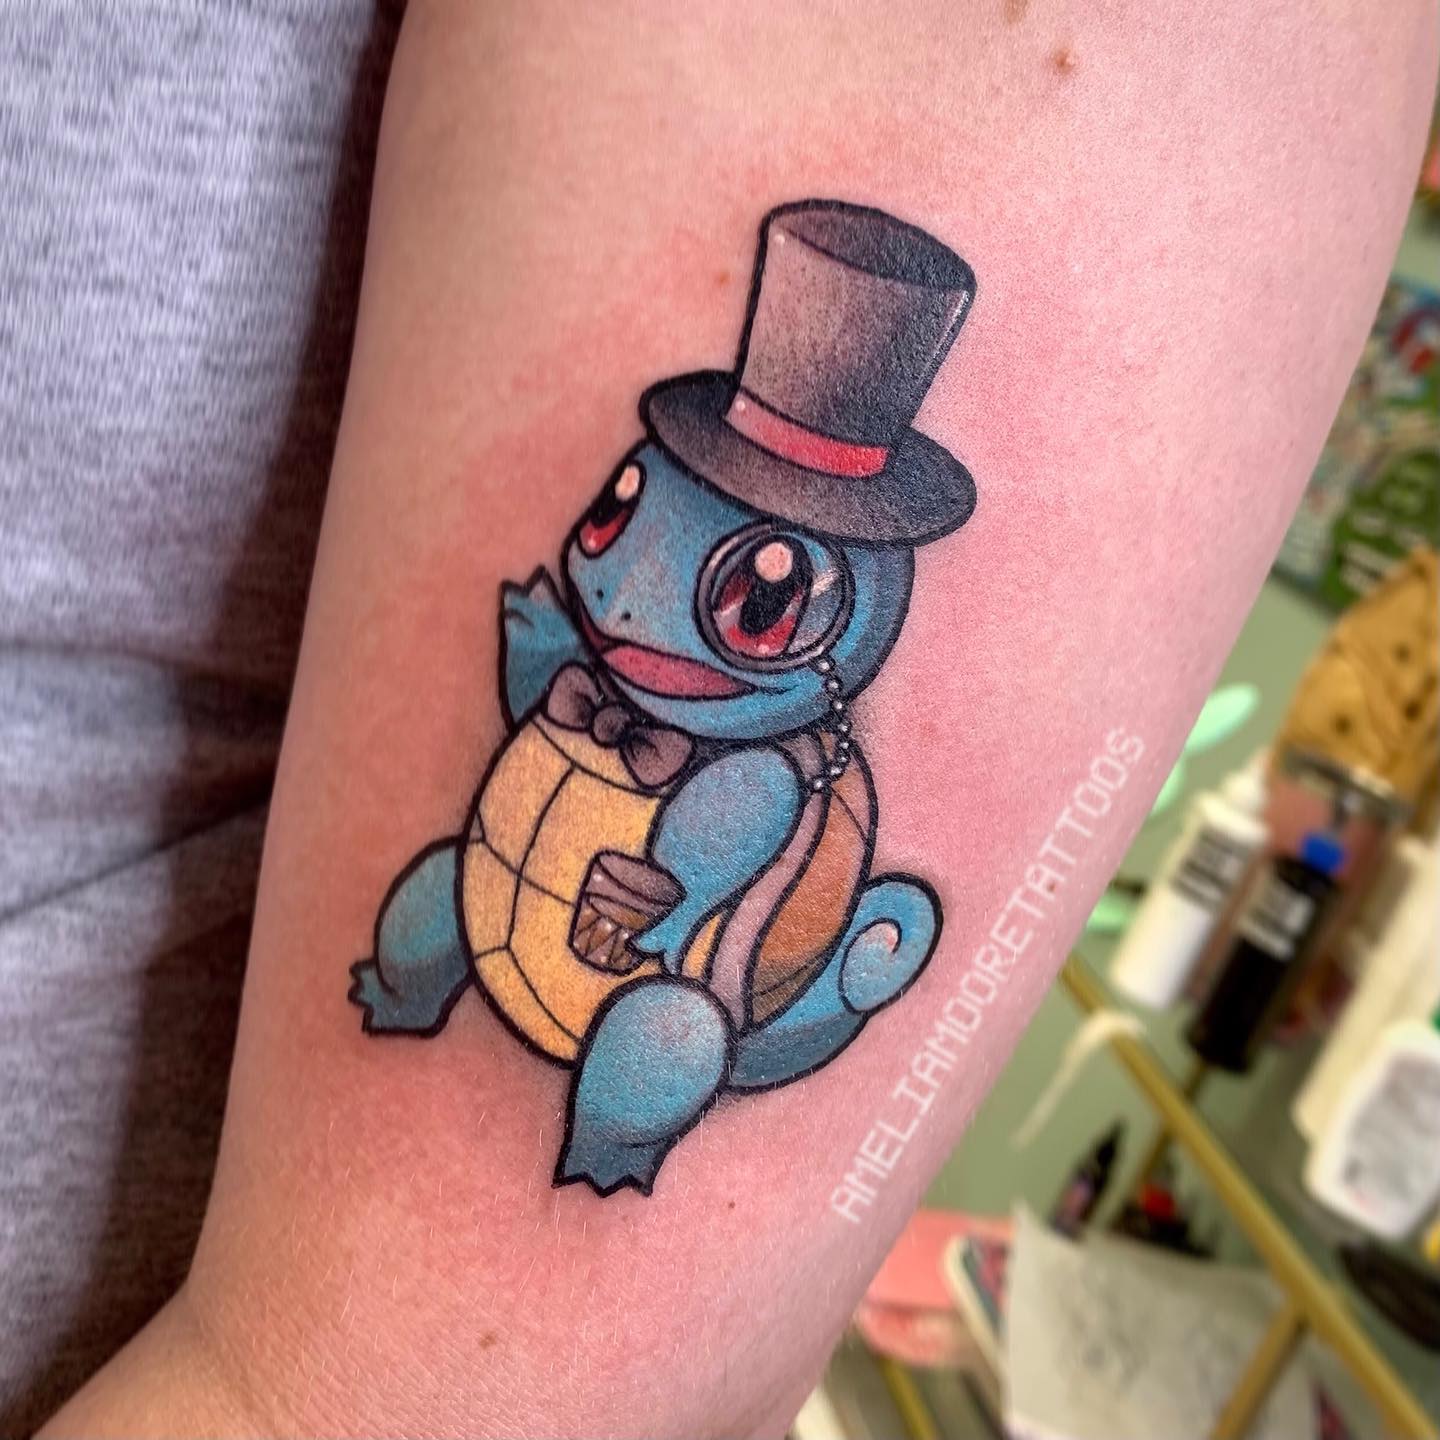 Squirtle is a water-type Pokemon and it is a cute turtle! Squirtle's name comes from the word 